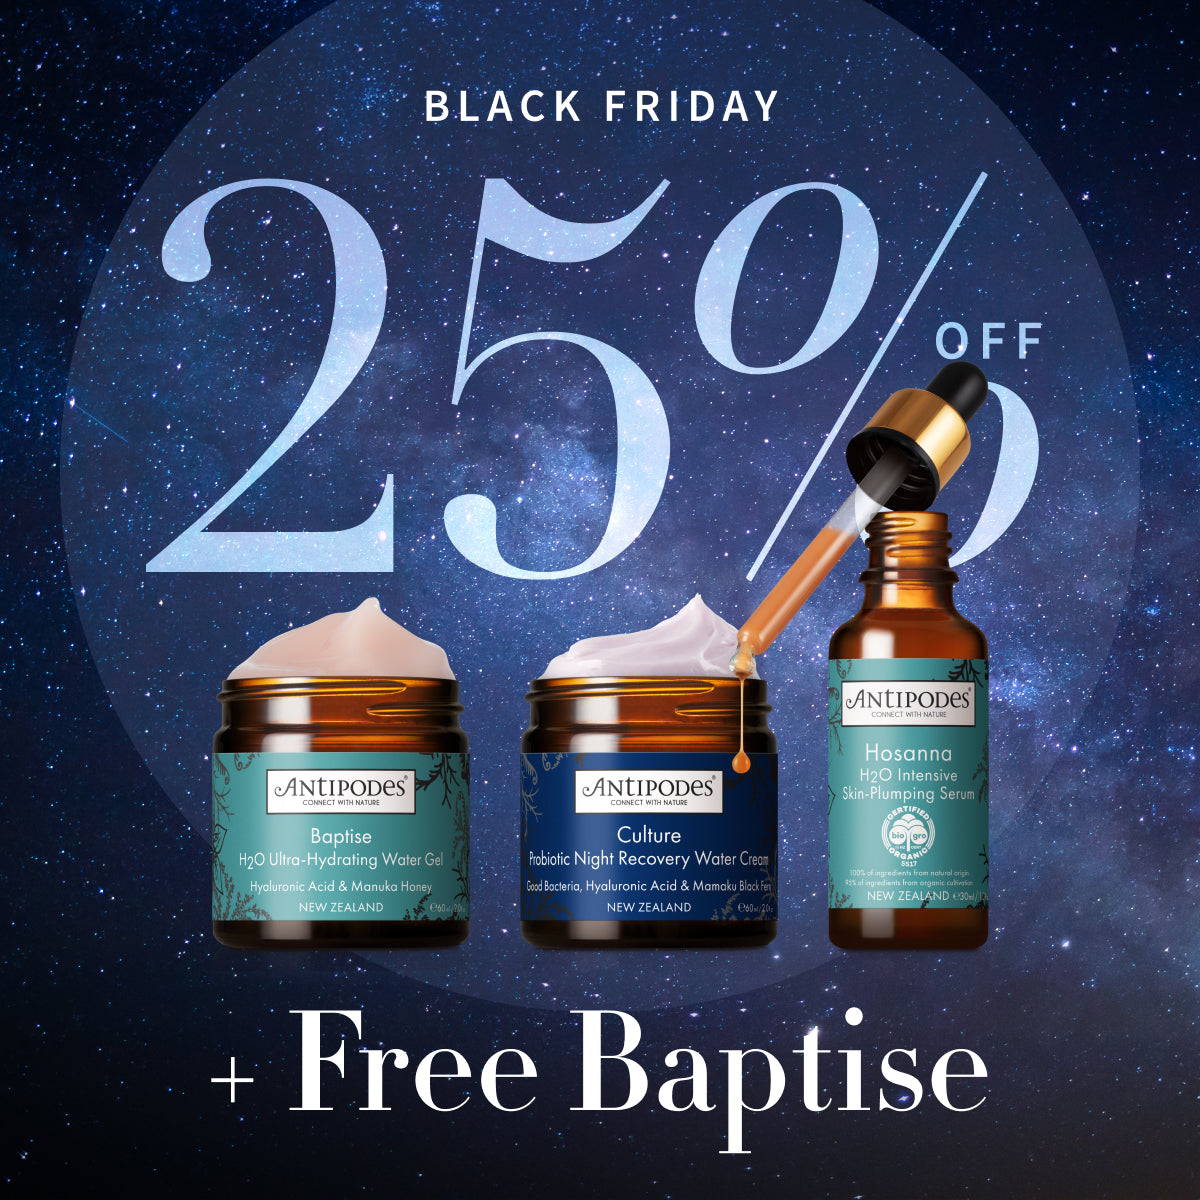 Black Friday 25% off sitewide plus free Baptise